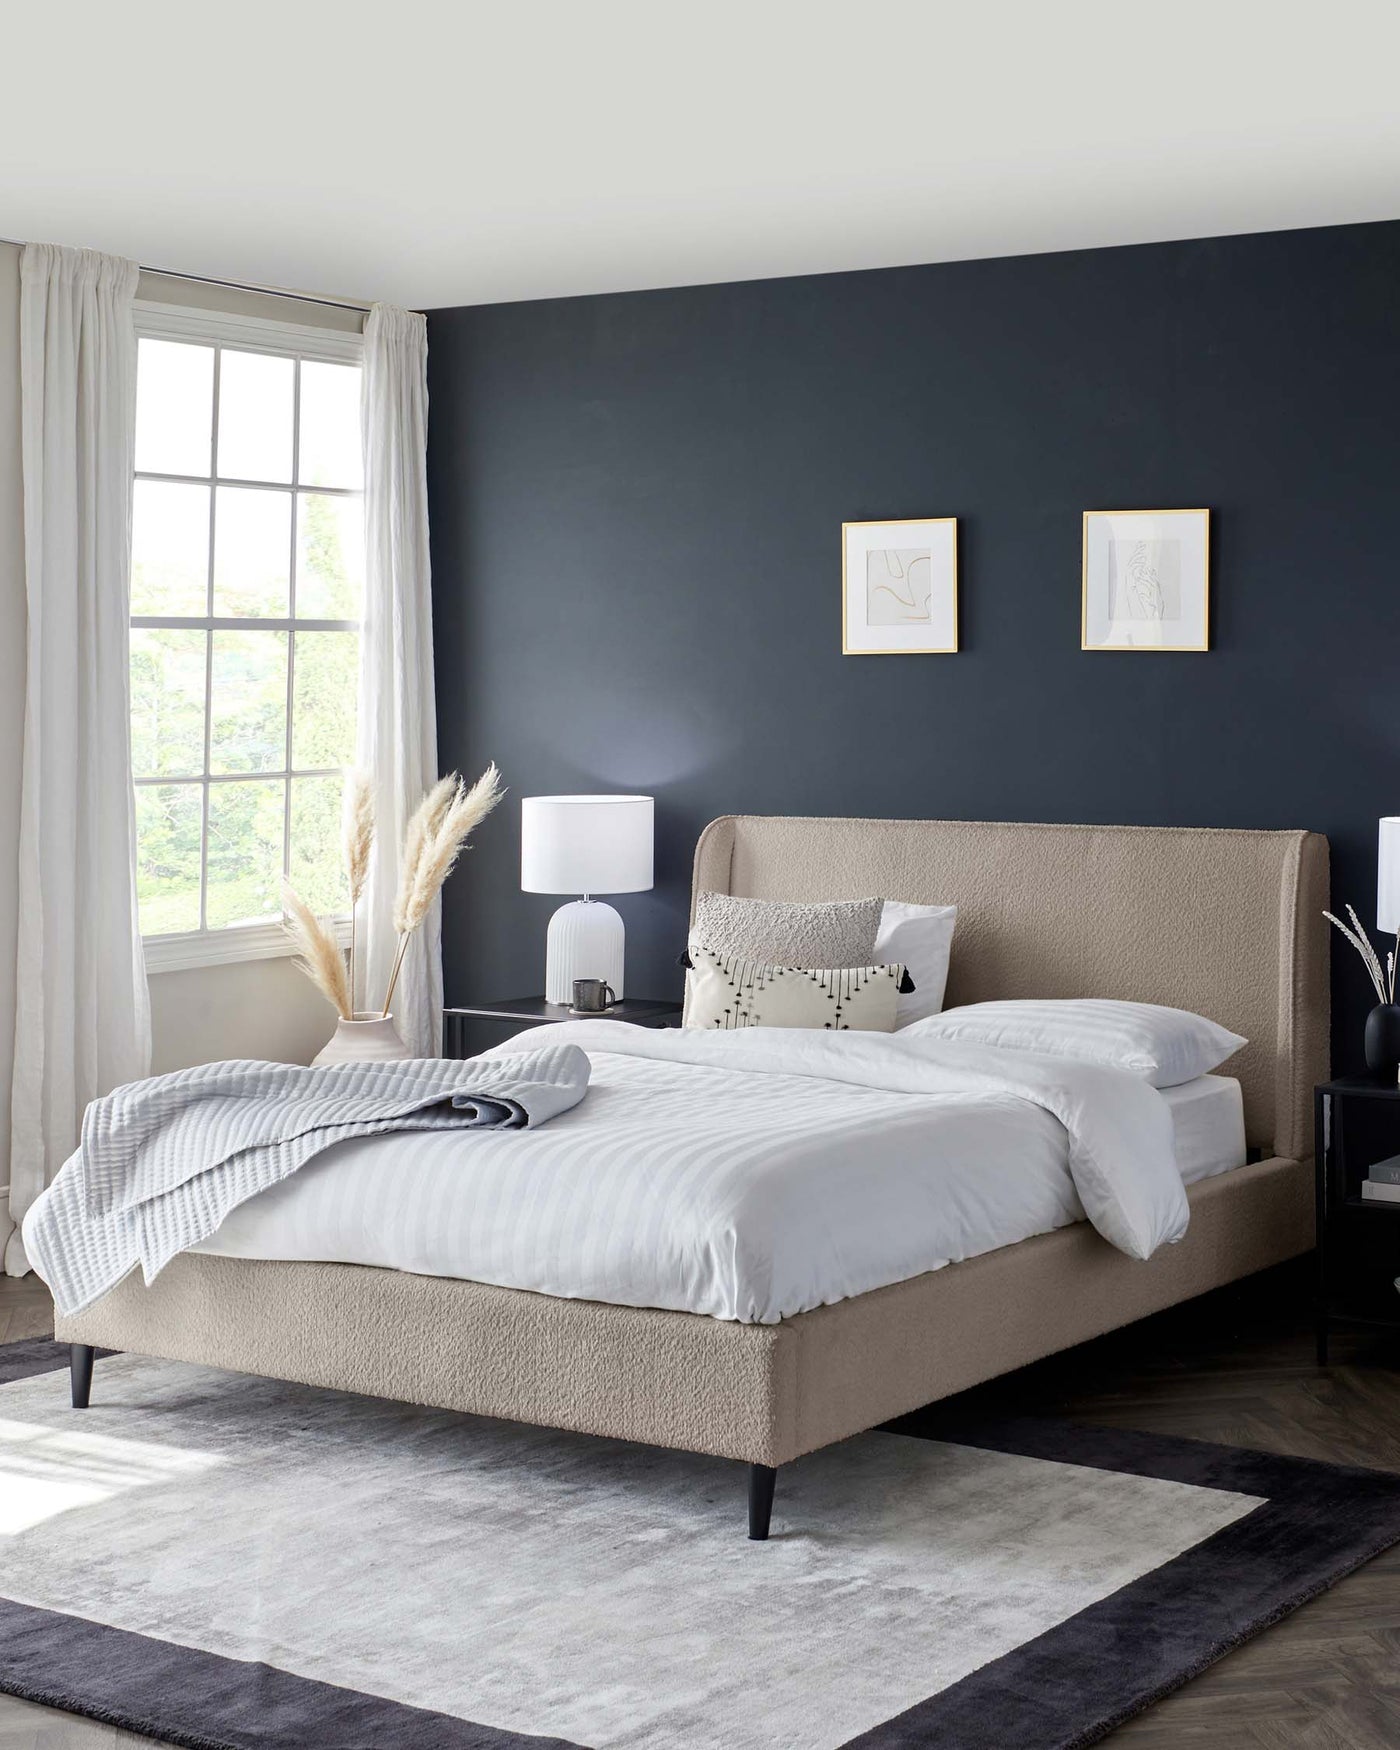 Contemporary upholstered queen-sized bed with a high headboard in a neutral beige tone, white bedding with a striped throw blanket, on a two-tone grey area rug. Matching bedside tables with black bases and a white table lamp on one side.